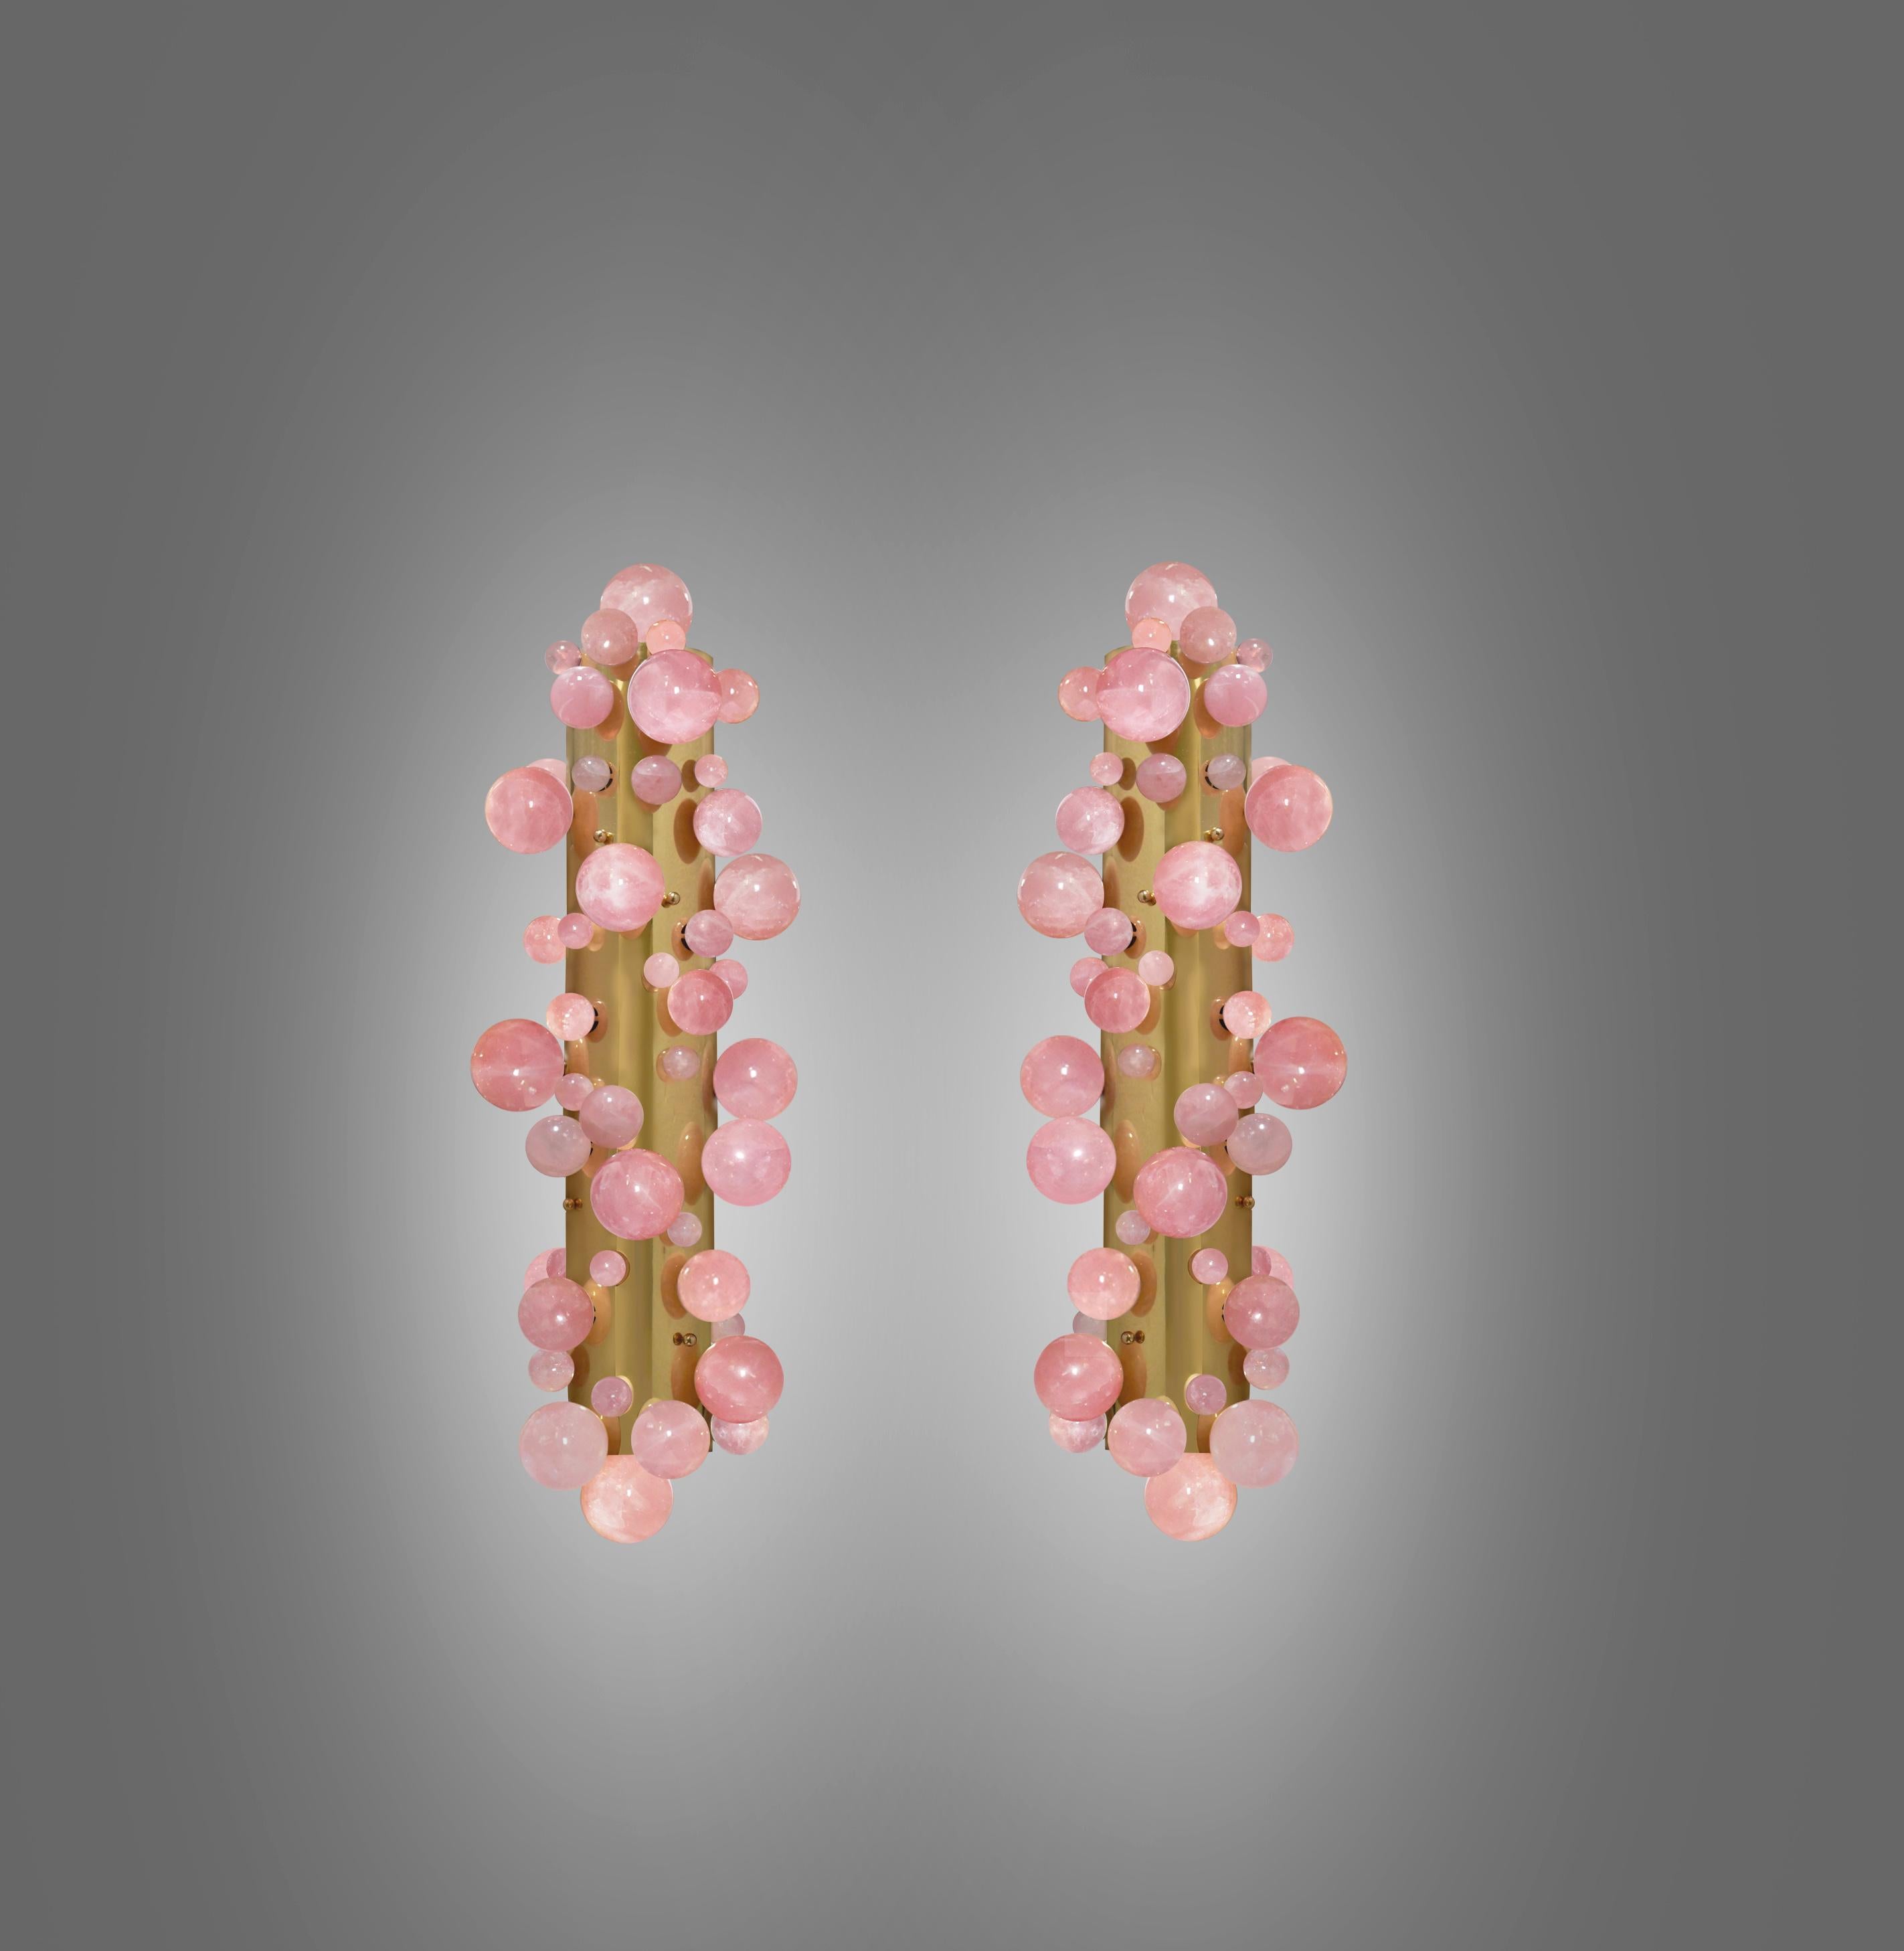 Pair of rose quartz bubble sconces with the polished brass finishes. Created by Phoenix gallery NYC.
Each sconce installed four sockets. Use four 60w LED warm light bulbs. Total 240w max. Light bulbs included.
Custom size and finish upon